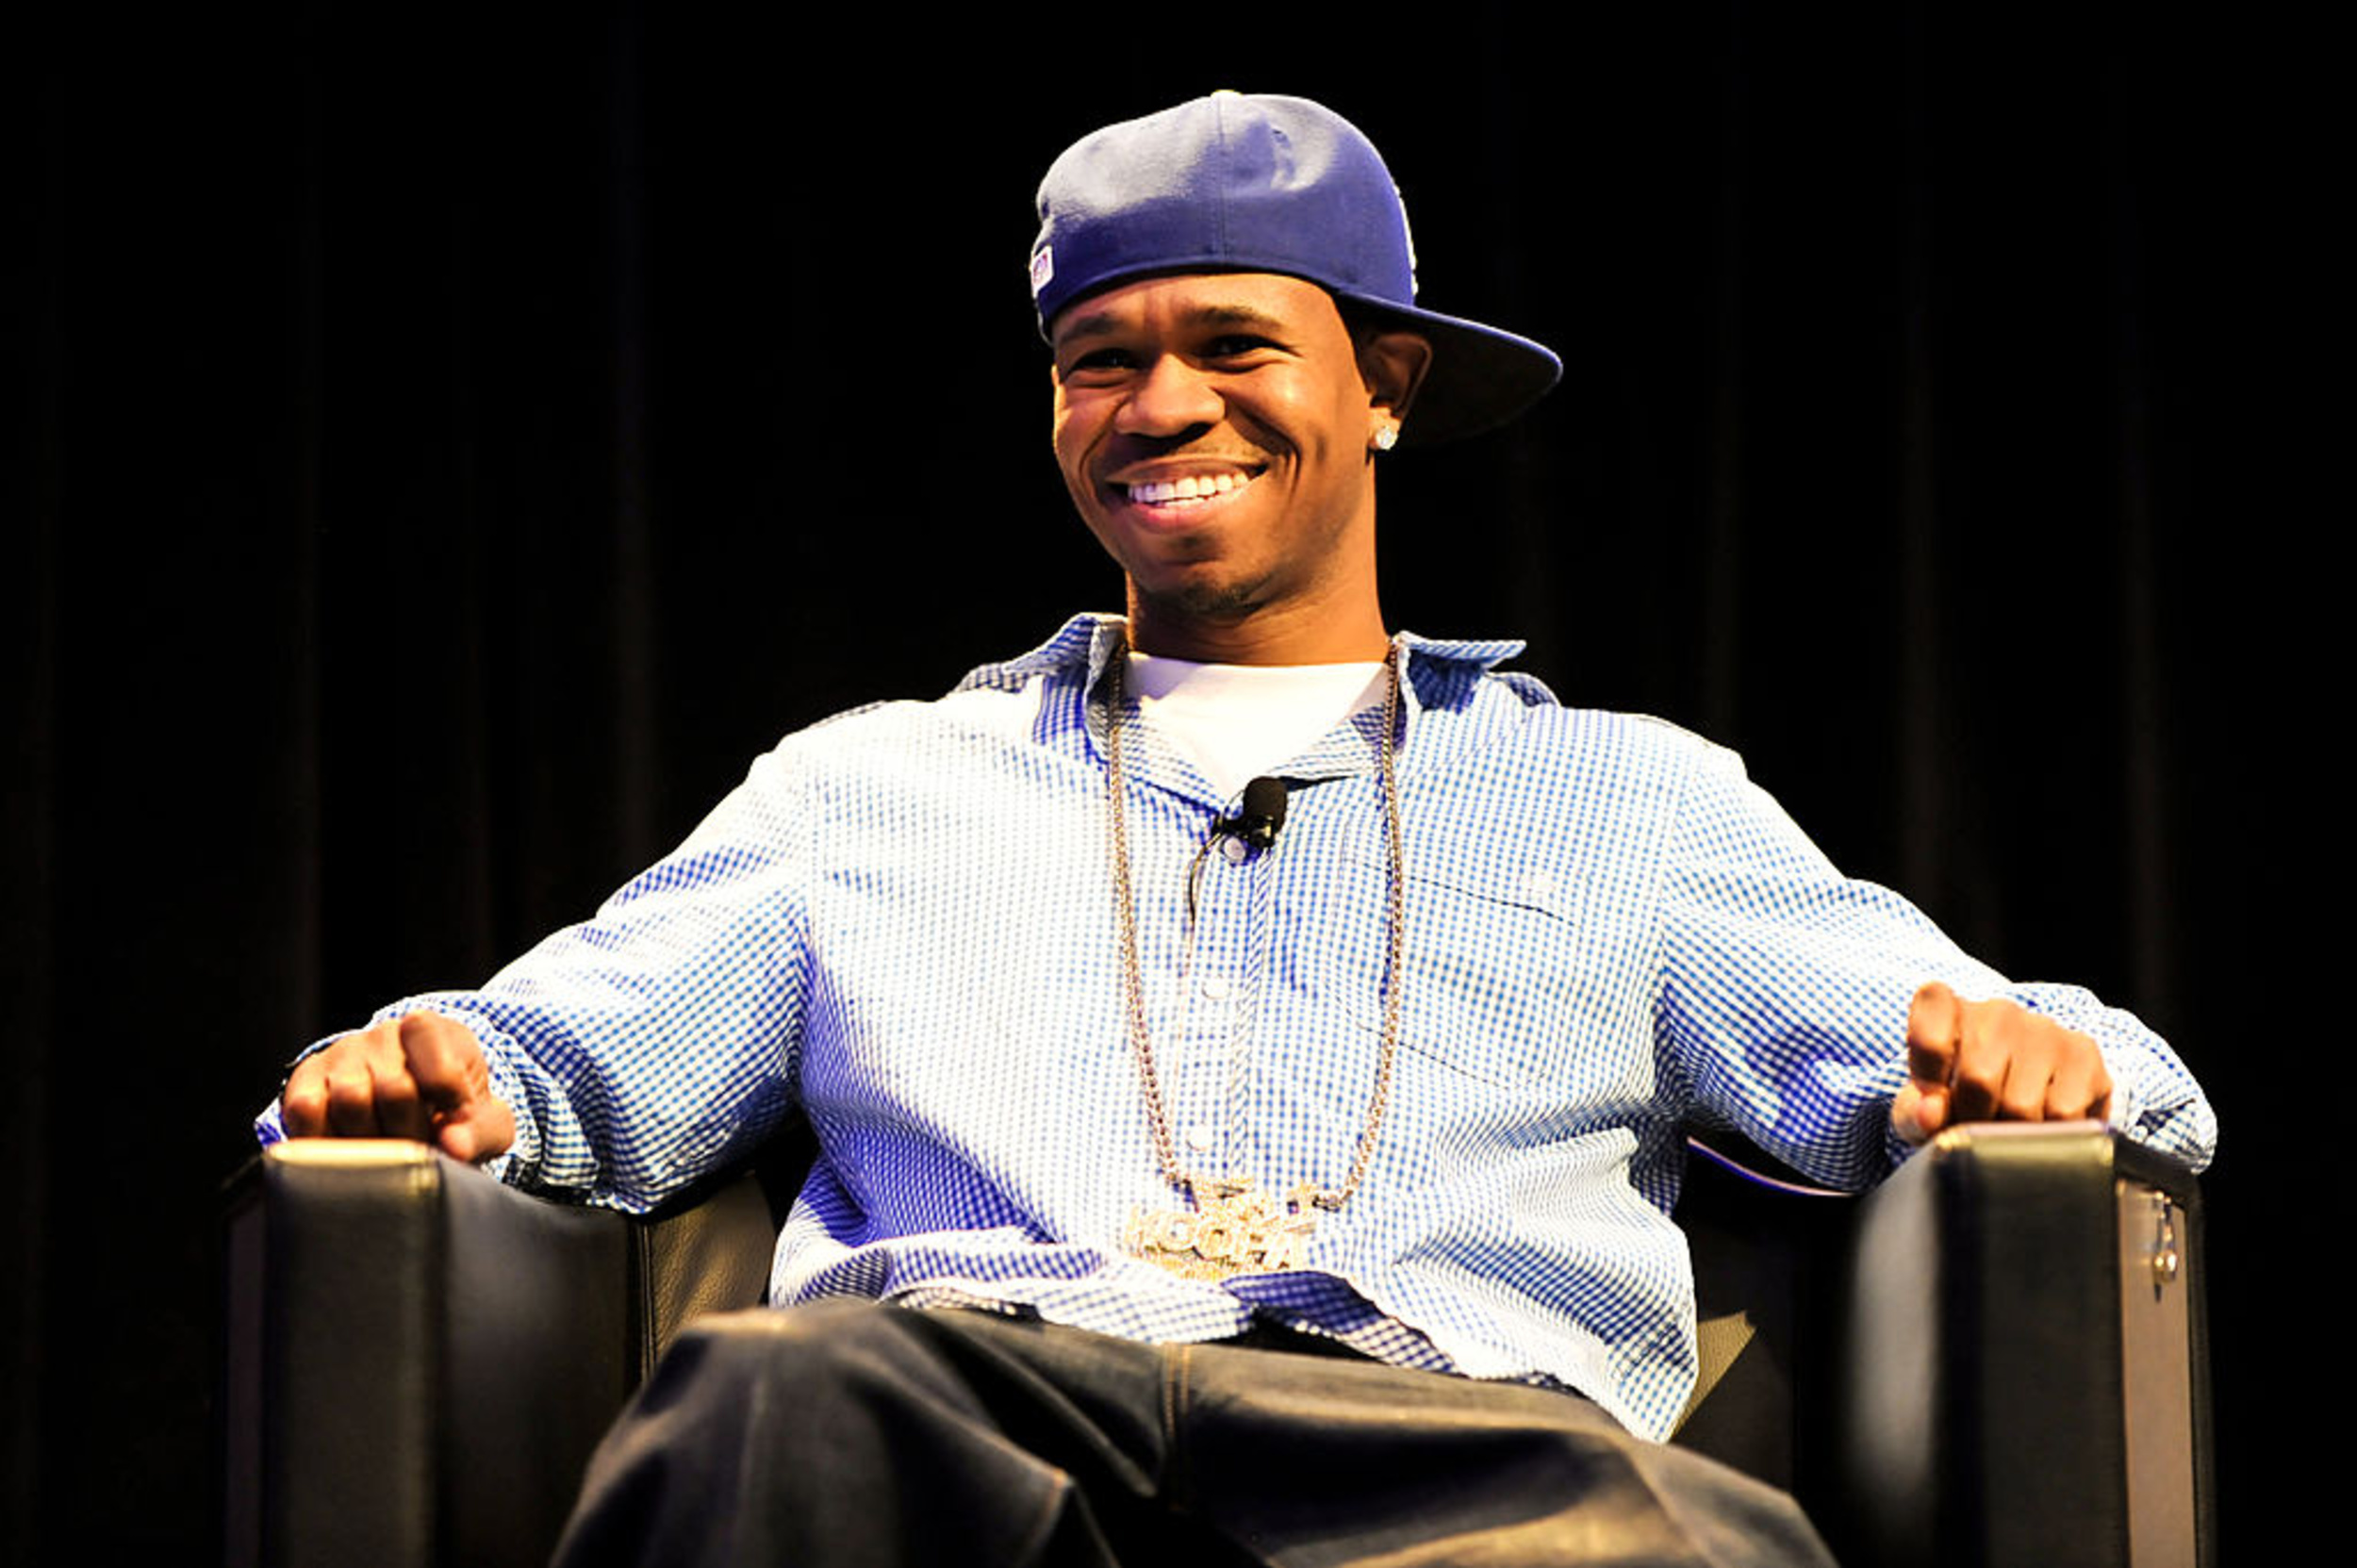 <p>When Chamillionaire released his single <a href="https://www.youtube.com/watch?v=CtwJvgPJ9xw" rel="noopener noreferrer">“Ridin,’”</a> it became an anthem for many people to play while driving. On the track, Chamillionaire details how police are trying to catch him driving with drugs in his possession. As he says on the hook, “They see me rollin',’ they hatin’ / Patrollin’ and tryna catch me ridin’ dirty.” </p><p><a href='https://www.msn.com/en-us/community/channel/vid-cj9pqbr0vn9in2b6ddcd8sfgpfq6x6utp44fssrv6mc2gtybw0us'>Follow us on MSN to see more of our exclusive entertainment content.</a></p>